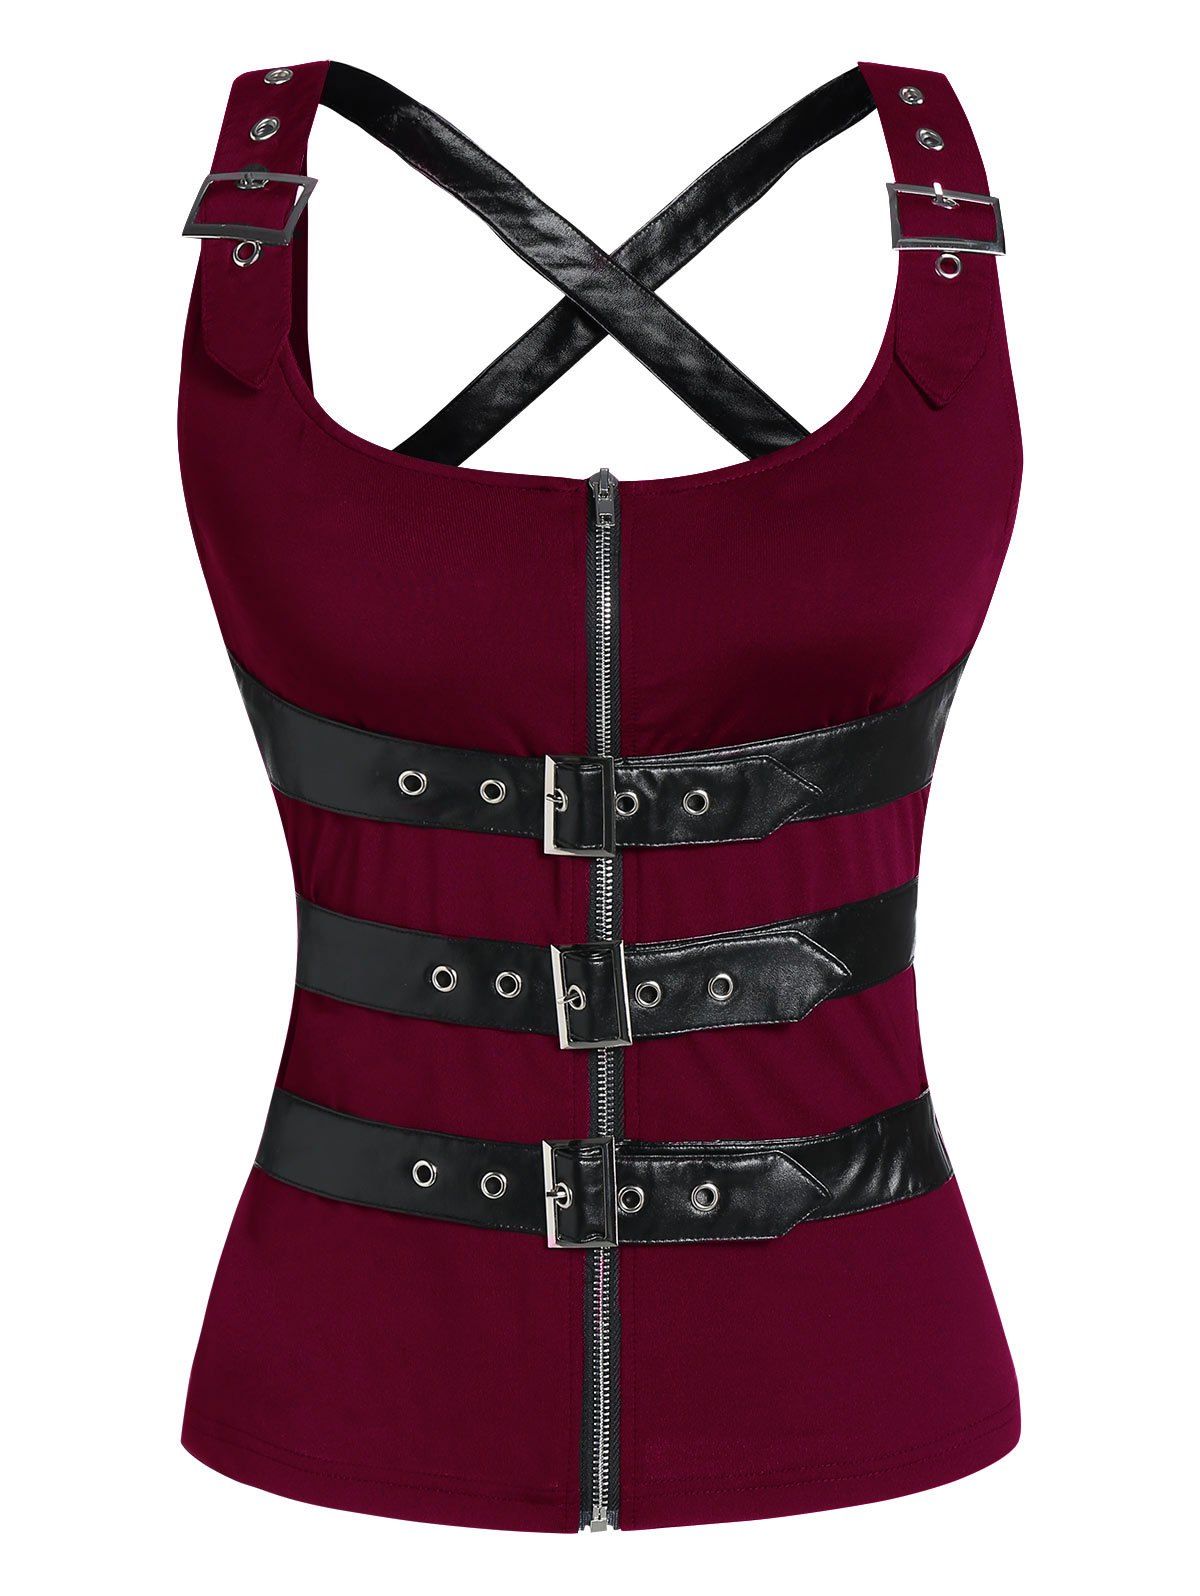 Buckle Strap Zip Up Cut Out Gothic Tank Top - FIREBRICK L